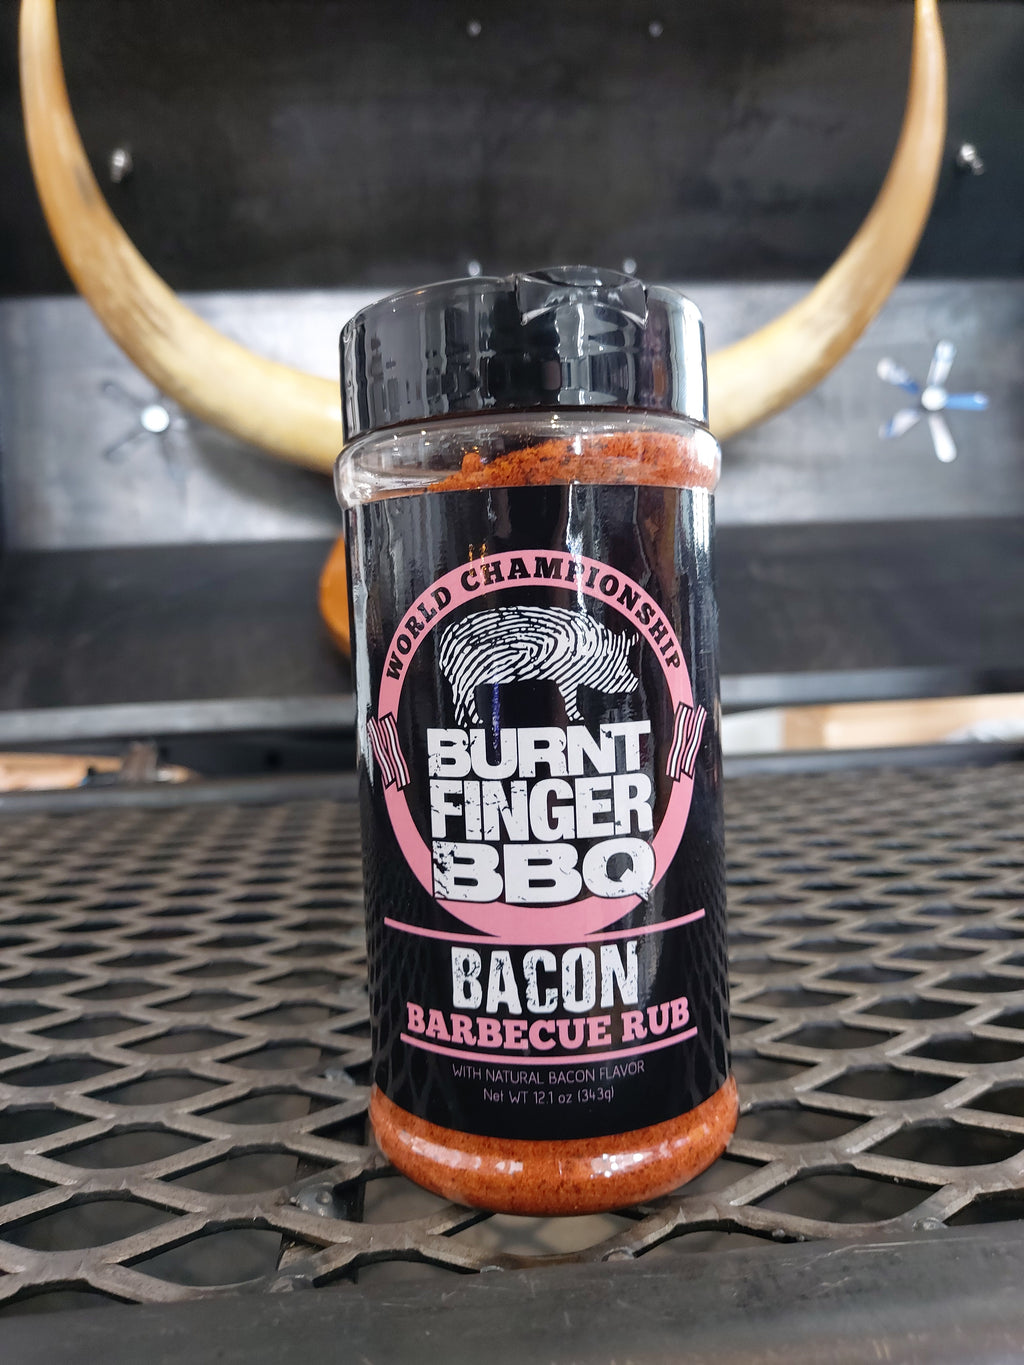 Bacon Barbecue Rub 343g by Burnt Finger BBQ